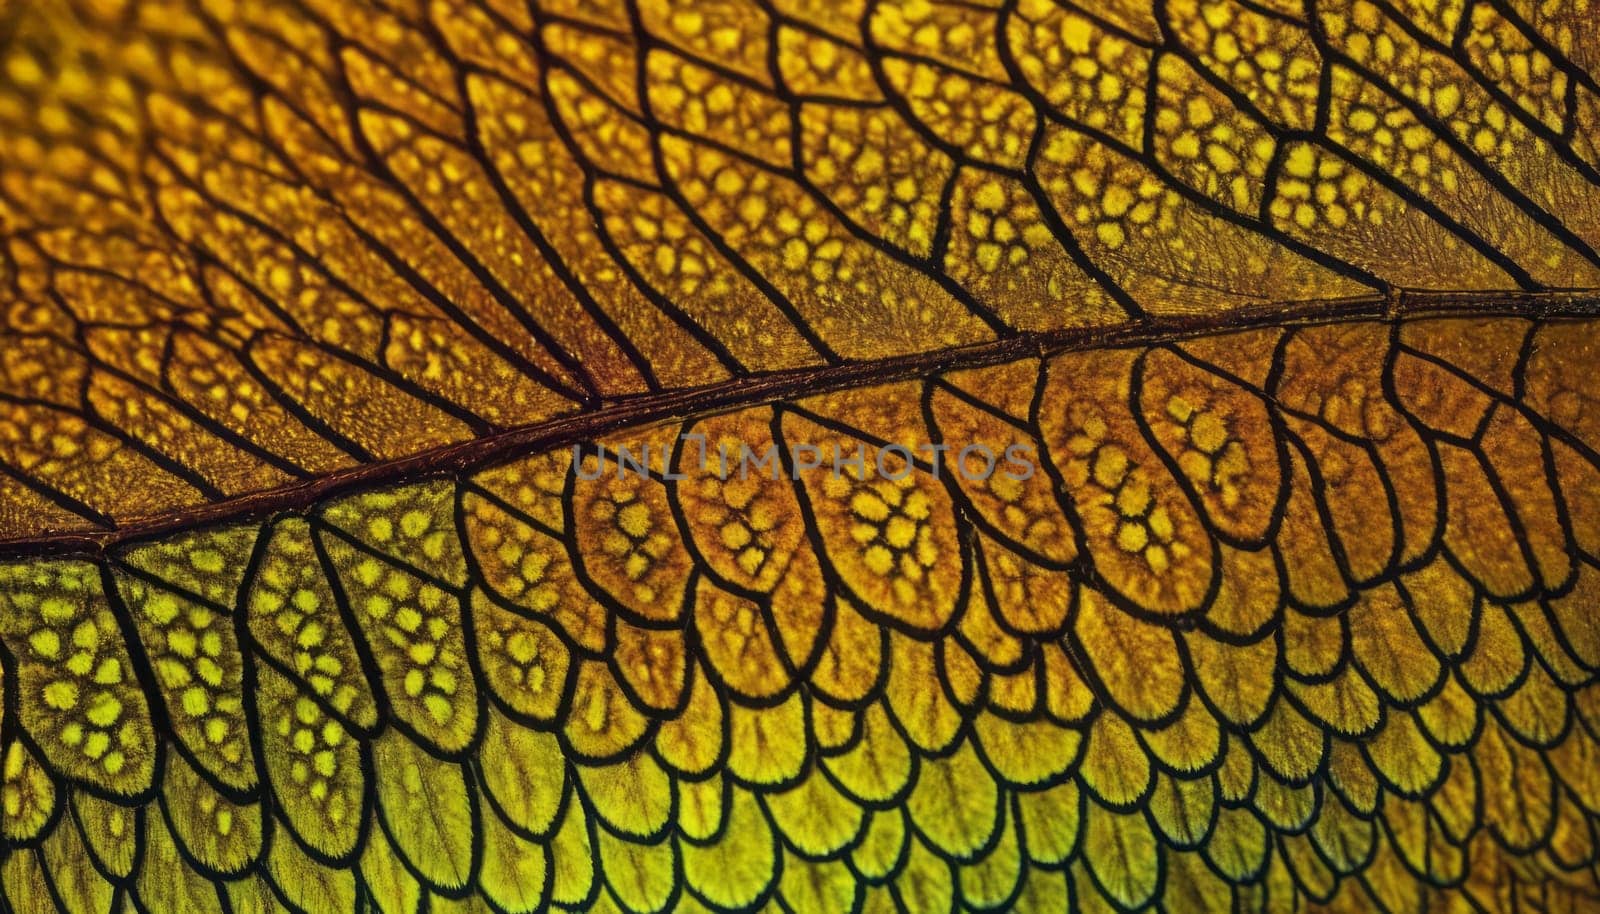 Microscopic View of Butterfly Wing by nkotlyar